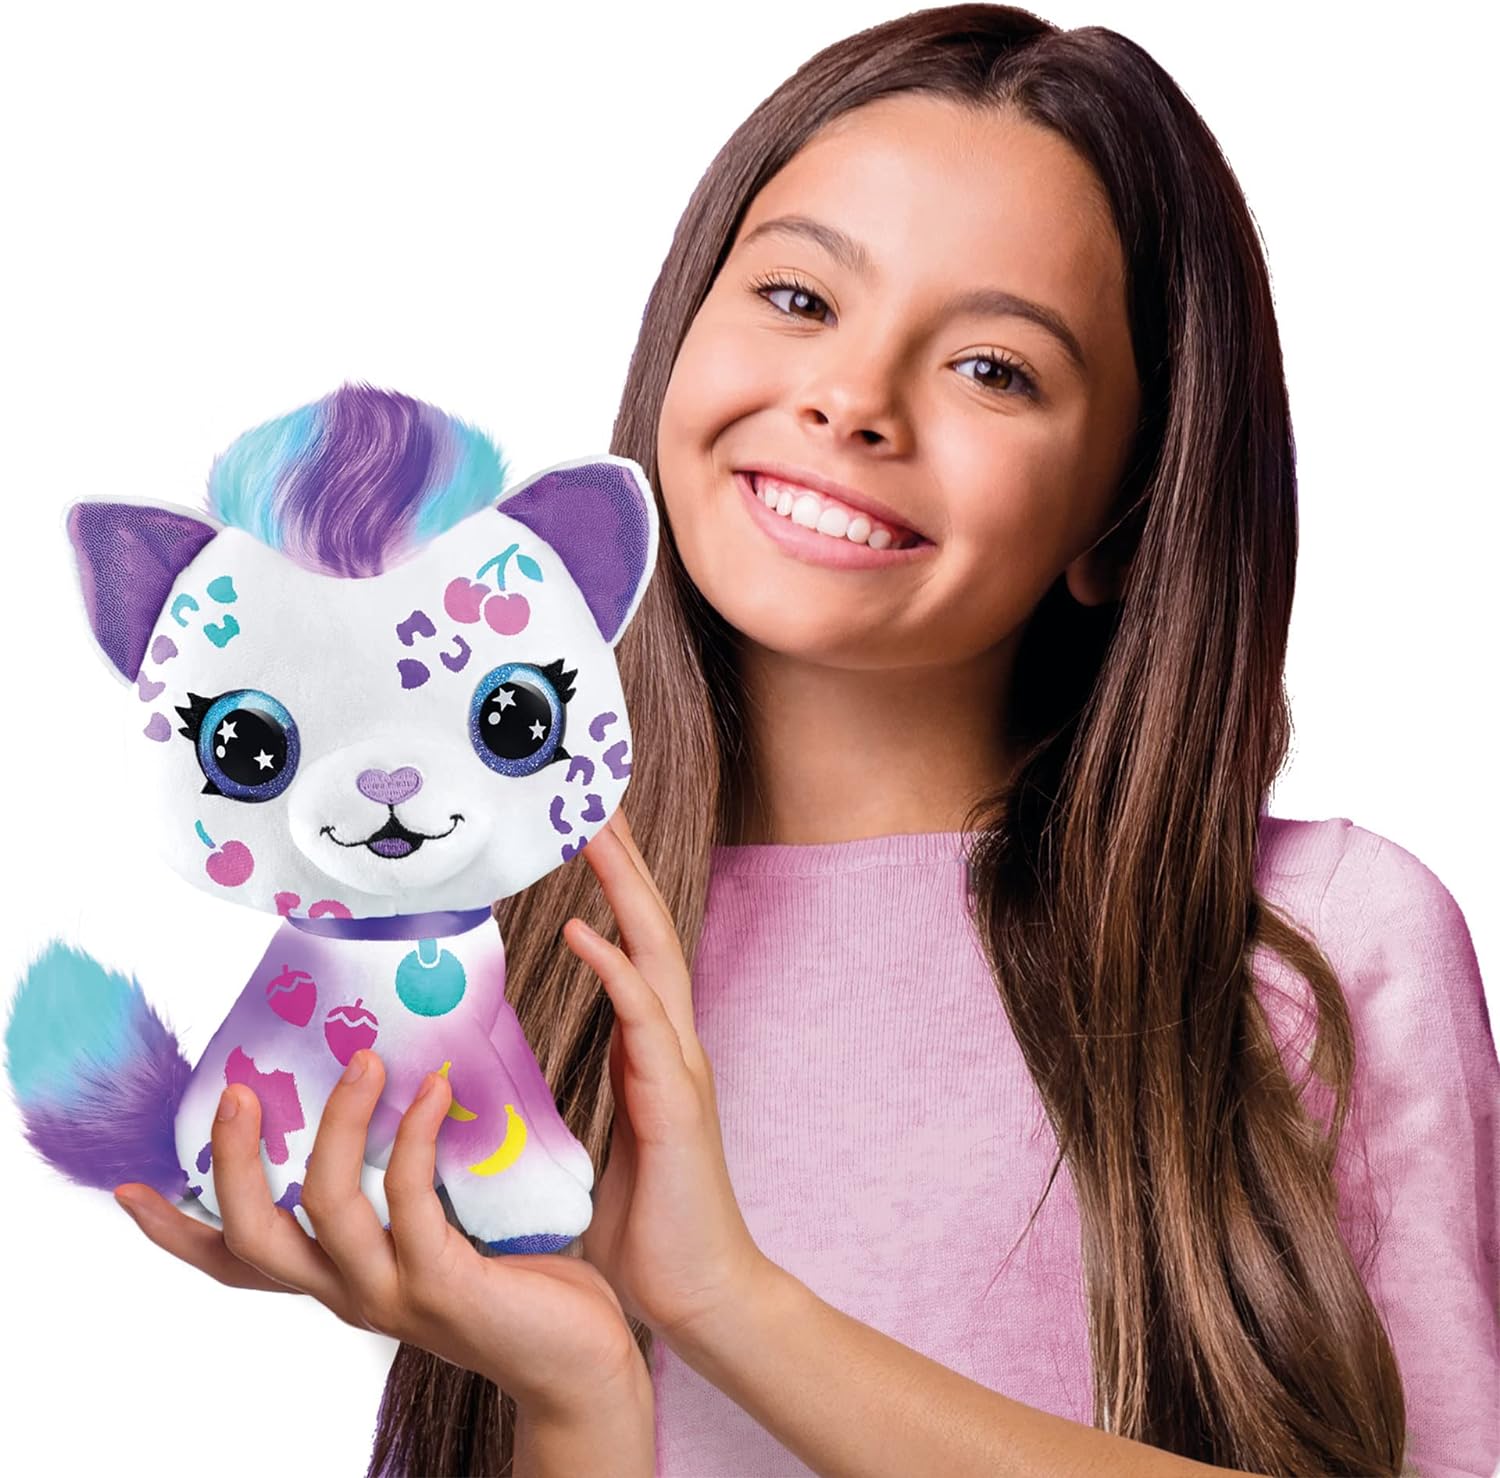 Canal Toys Personalize Airbrush Plush Large Kitty